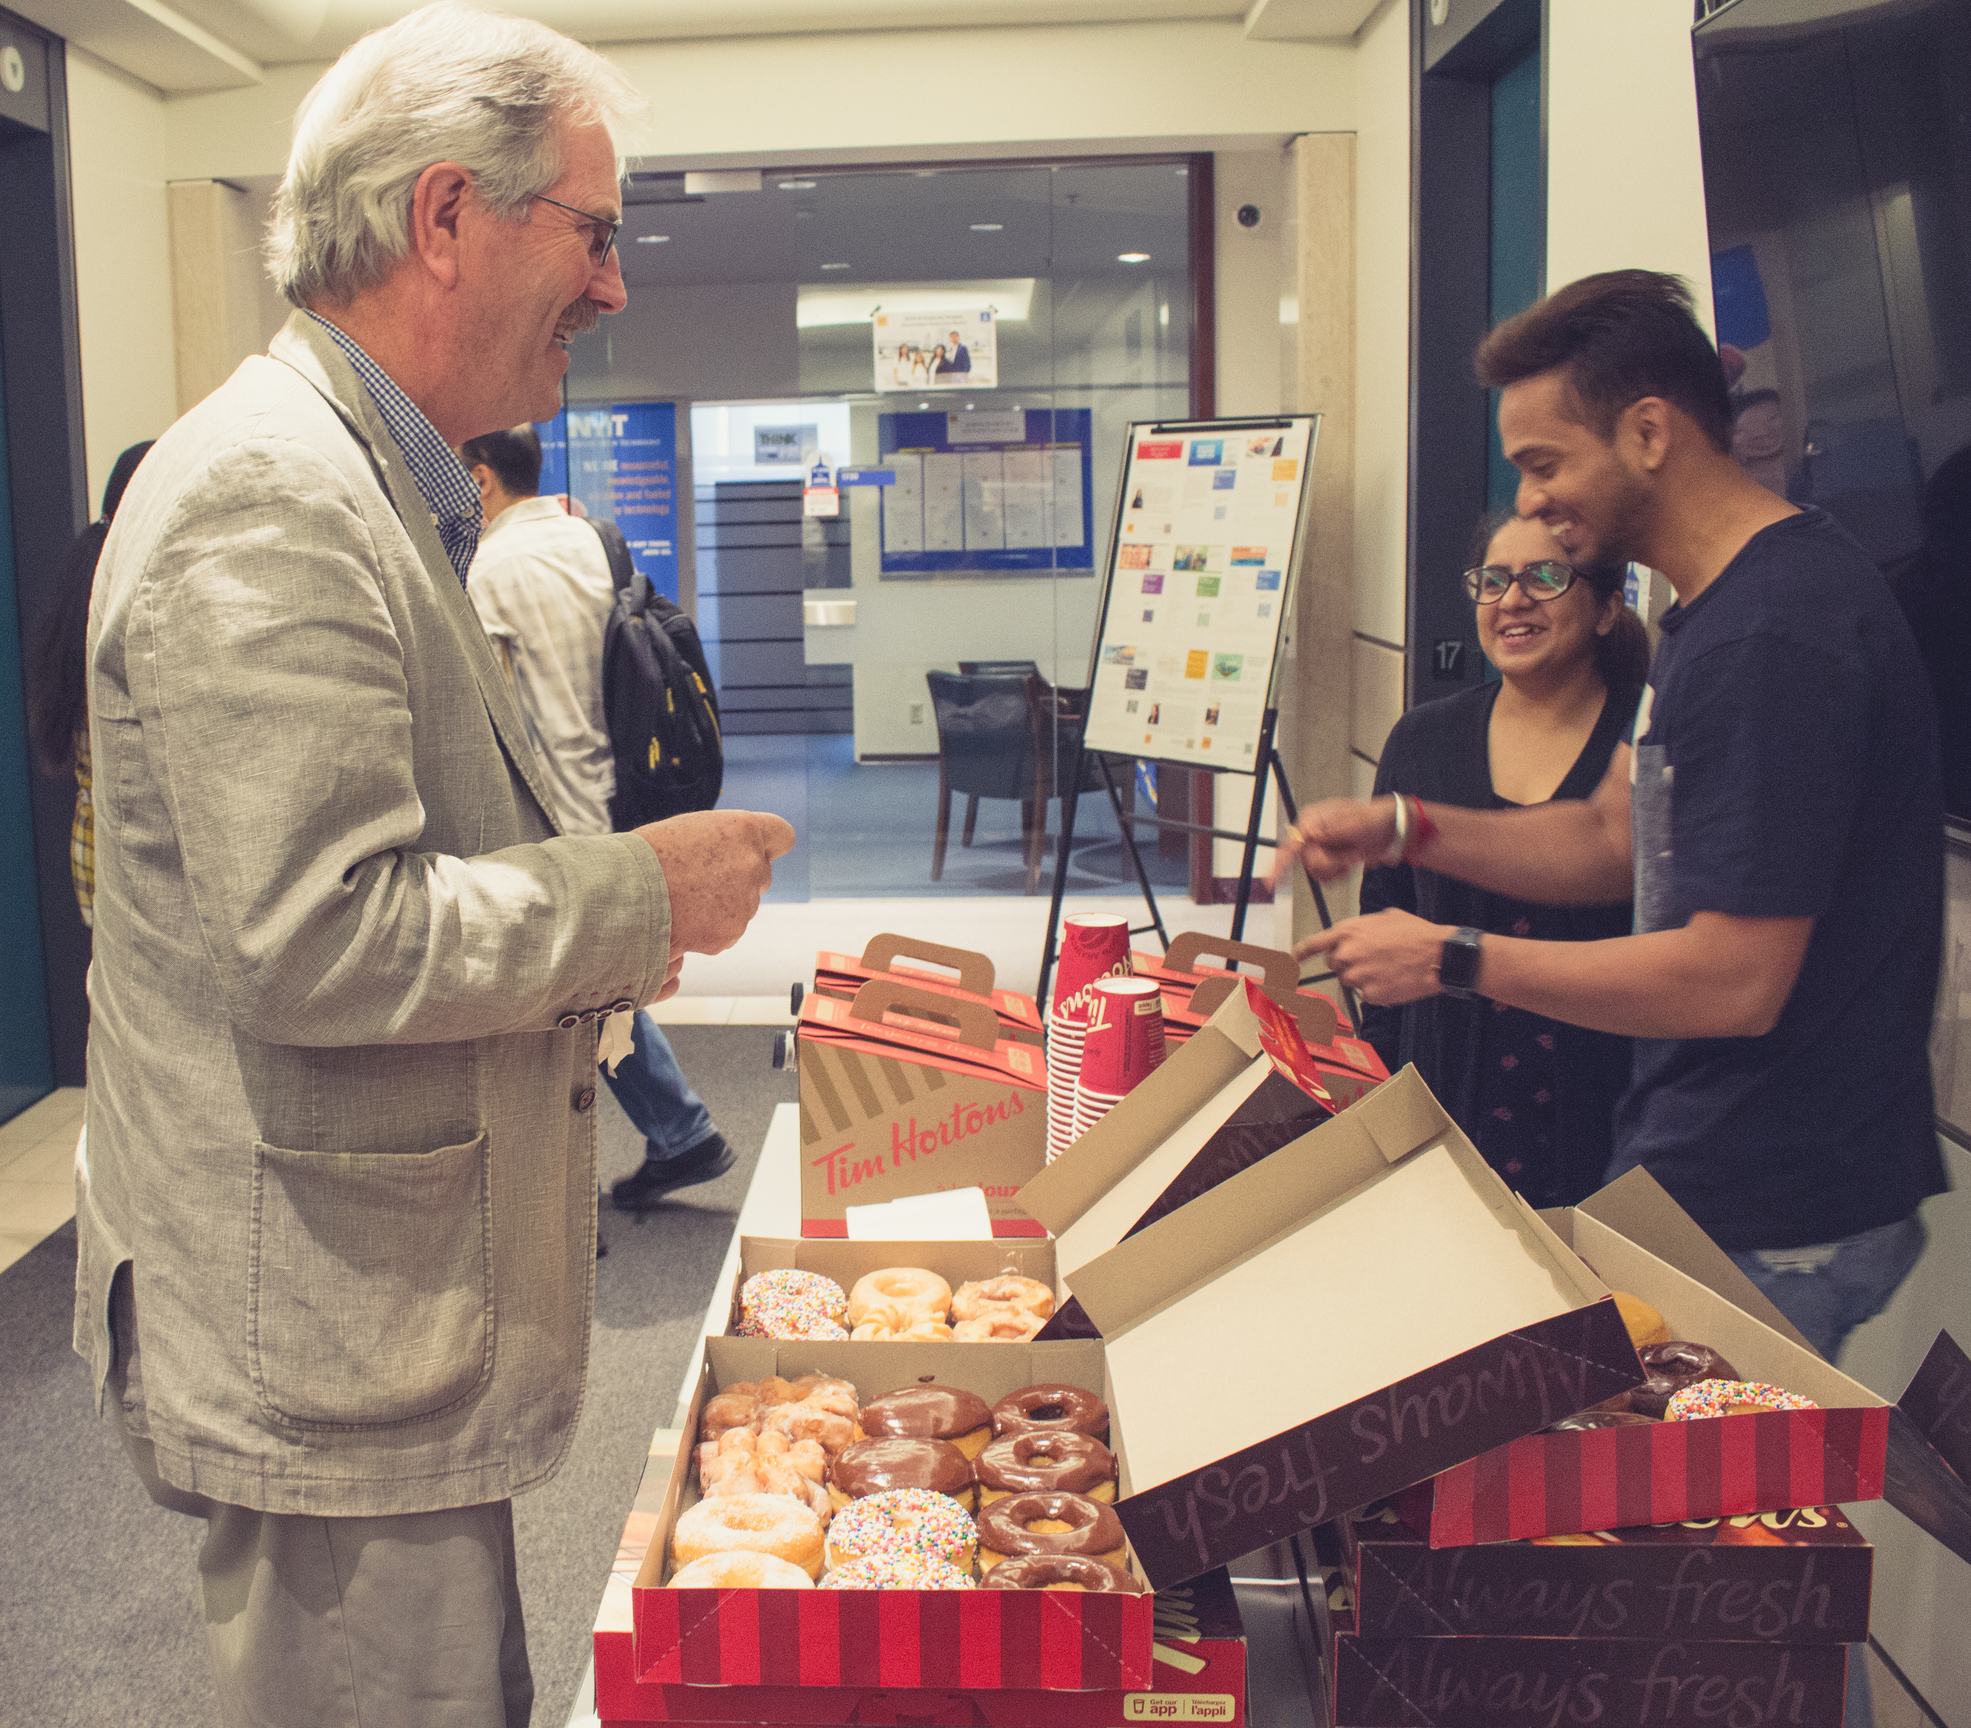 Frederick MacDonald, Assistant Dean for College of Engineering and Computing Science, enjoying the free coffee and donuts